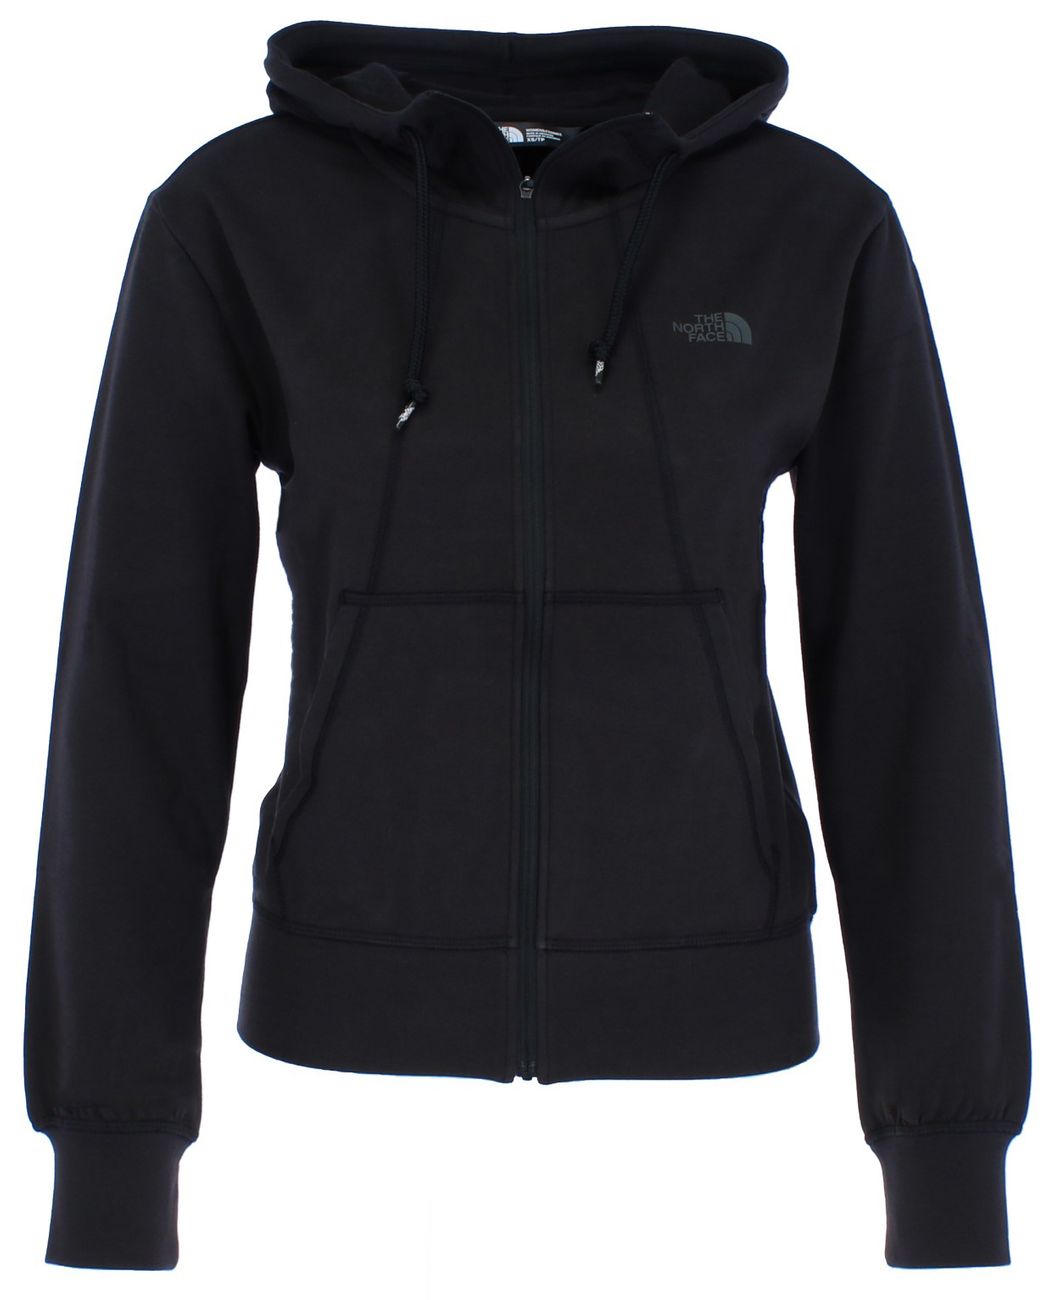 The North Face Ascential Full Zip Damen Hoodie - The North Face - SAGATOO - 192363095752